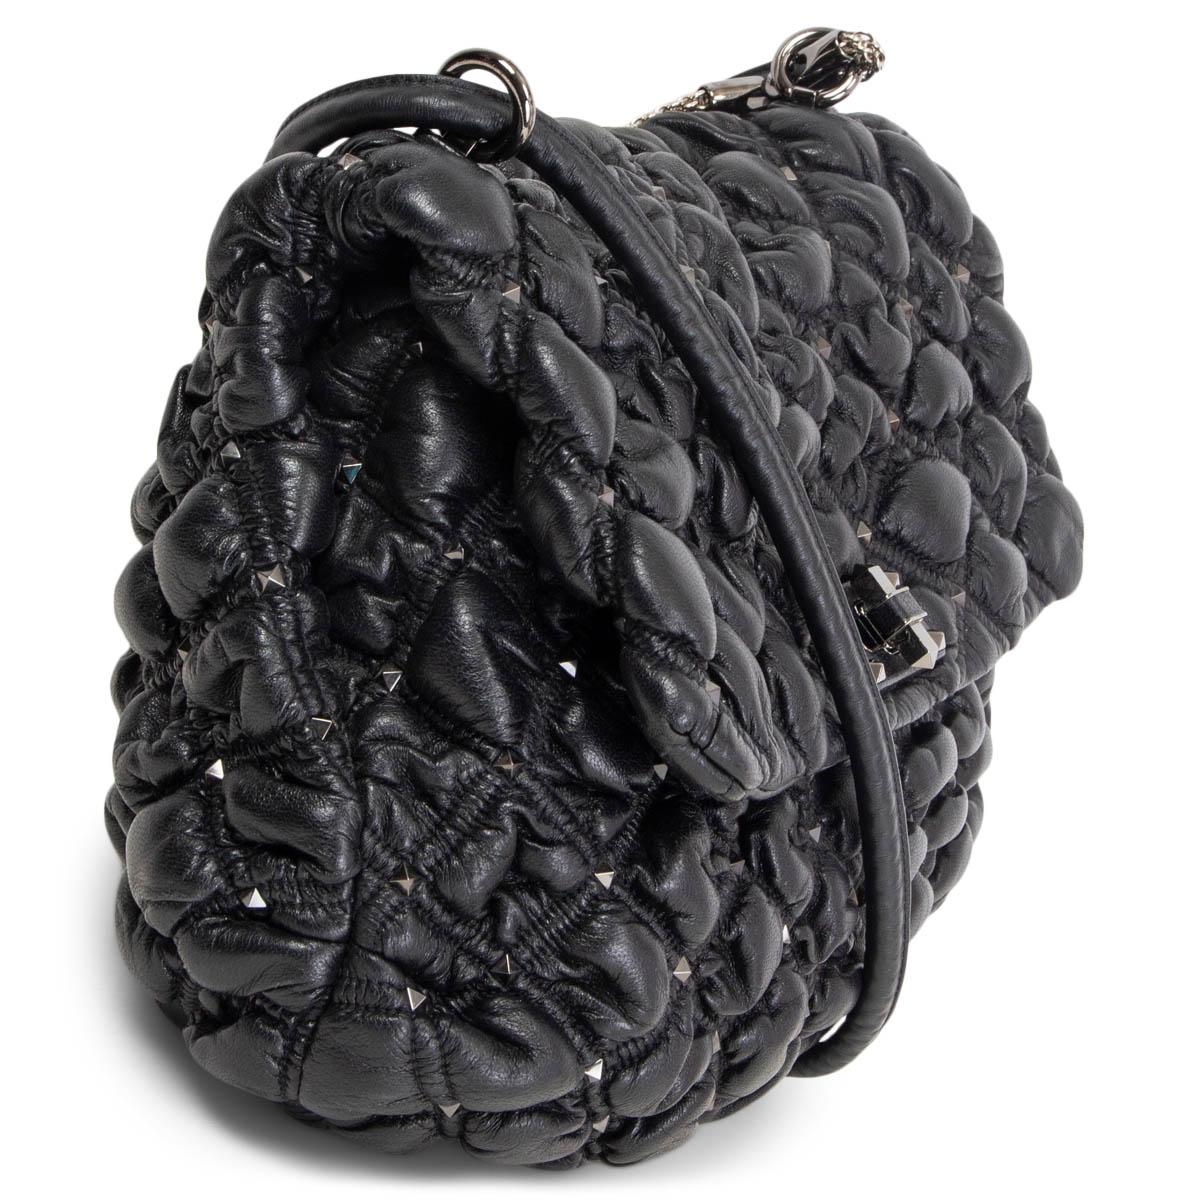 100% authentic Valentino SPIKEME Large Quilted Nappa Leather Shoulder Bag in black. Made of a soft and rounded design. Embellished with all-over micro gunmetal metal studs. Opens with a flap closure and metal twist mechanism. Interior is lined in